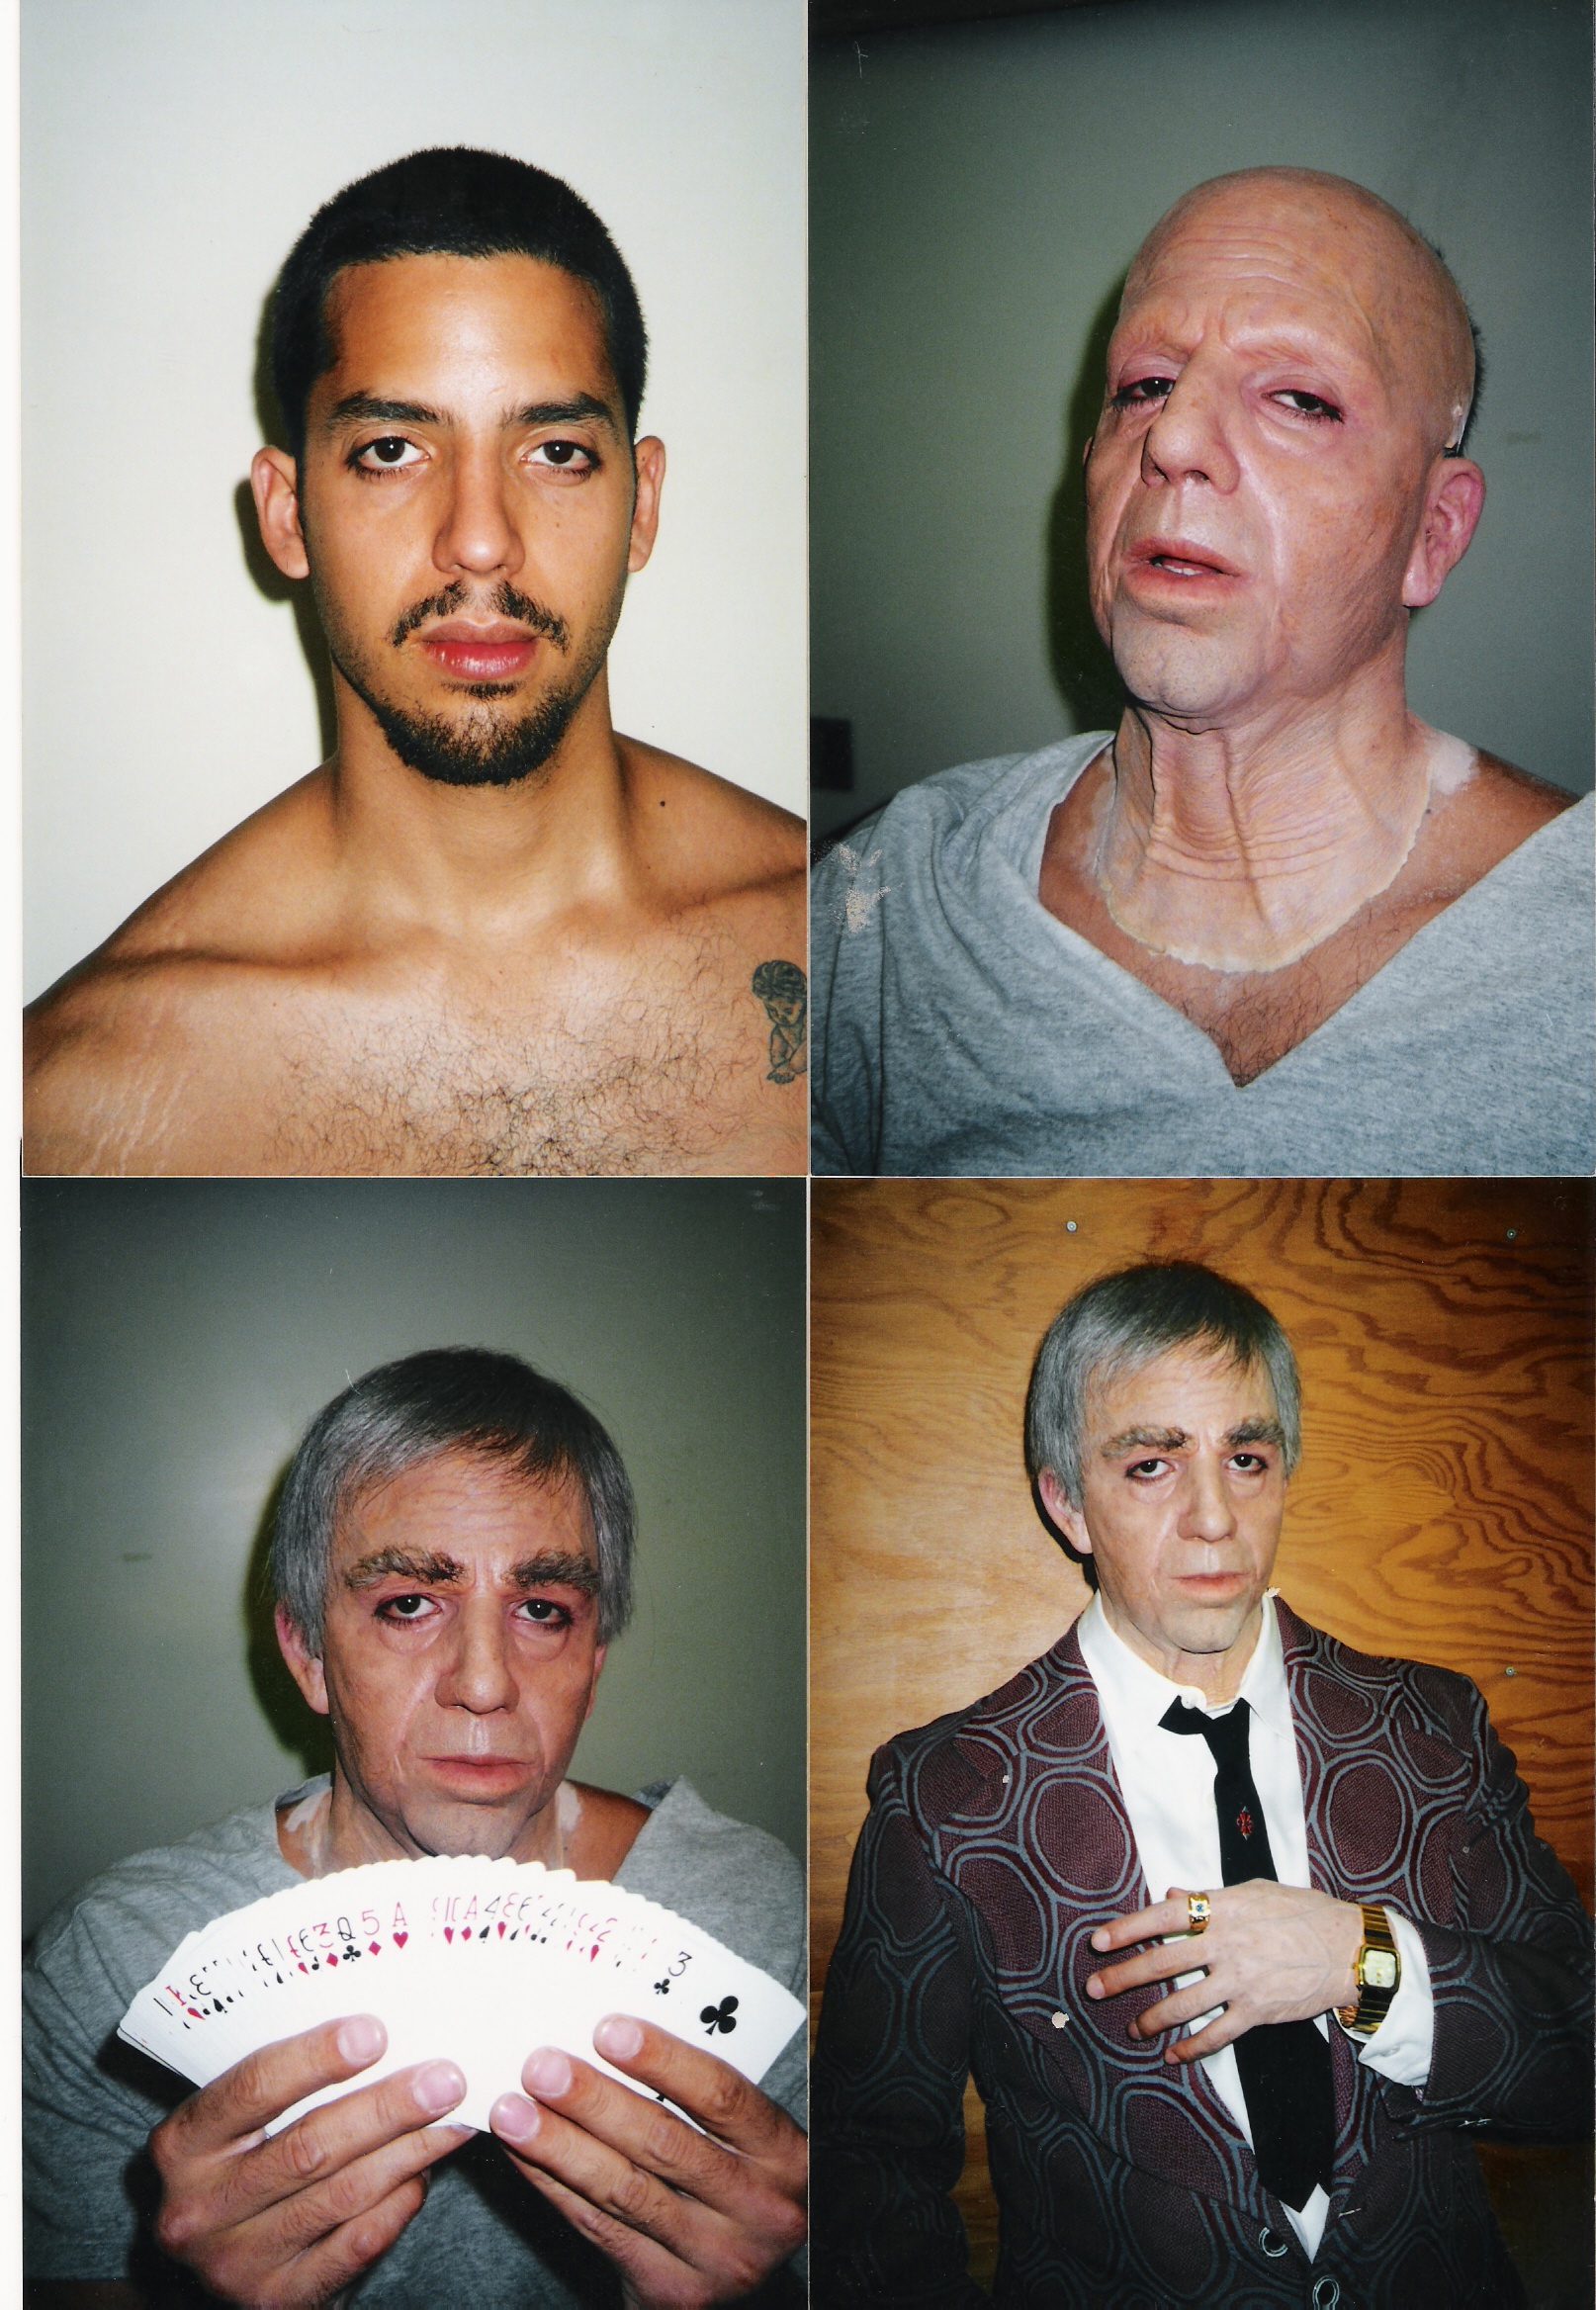 Prosthetic disguise for magician David Blaine; makeup by Norman Bryn.